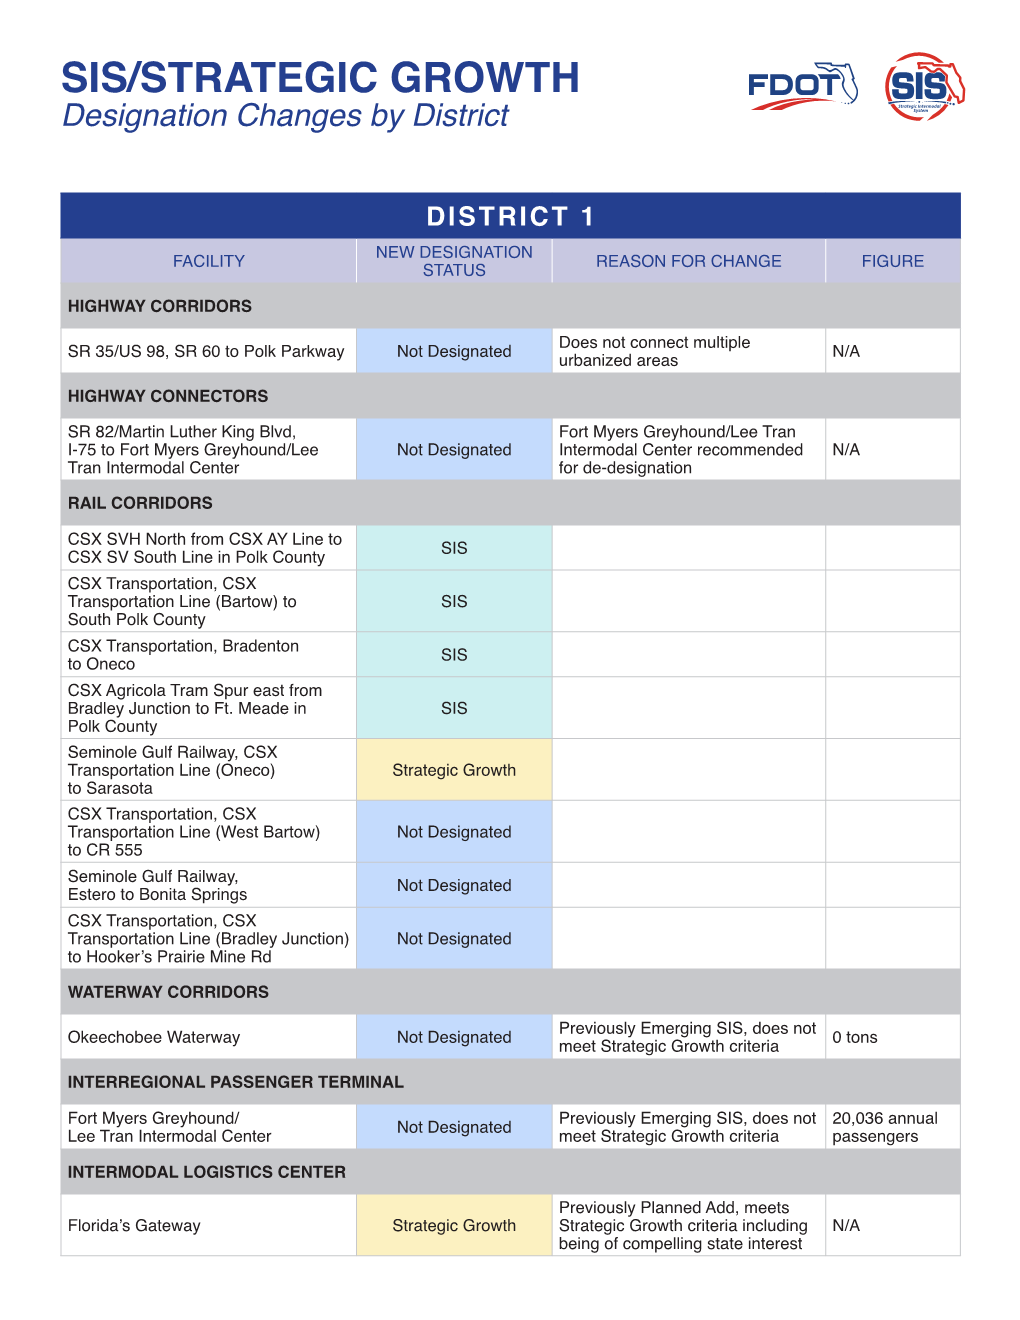 SIS/STRATEGIC GROWTH Designation Changes by District